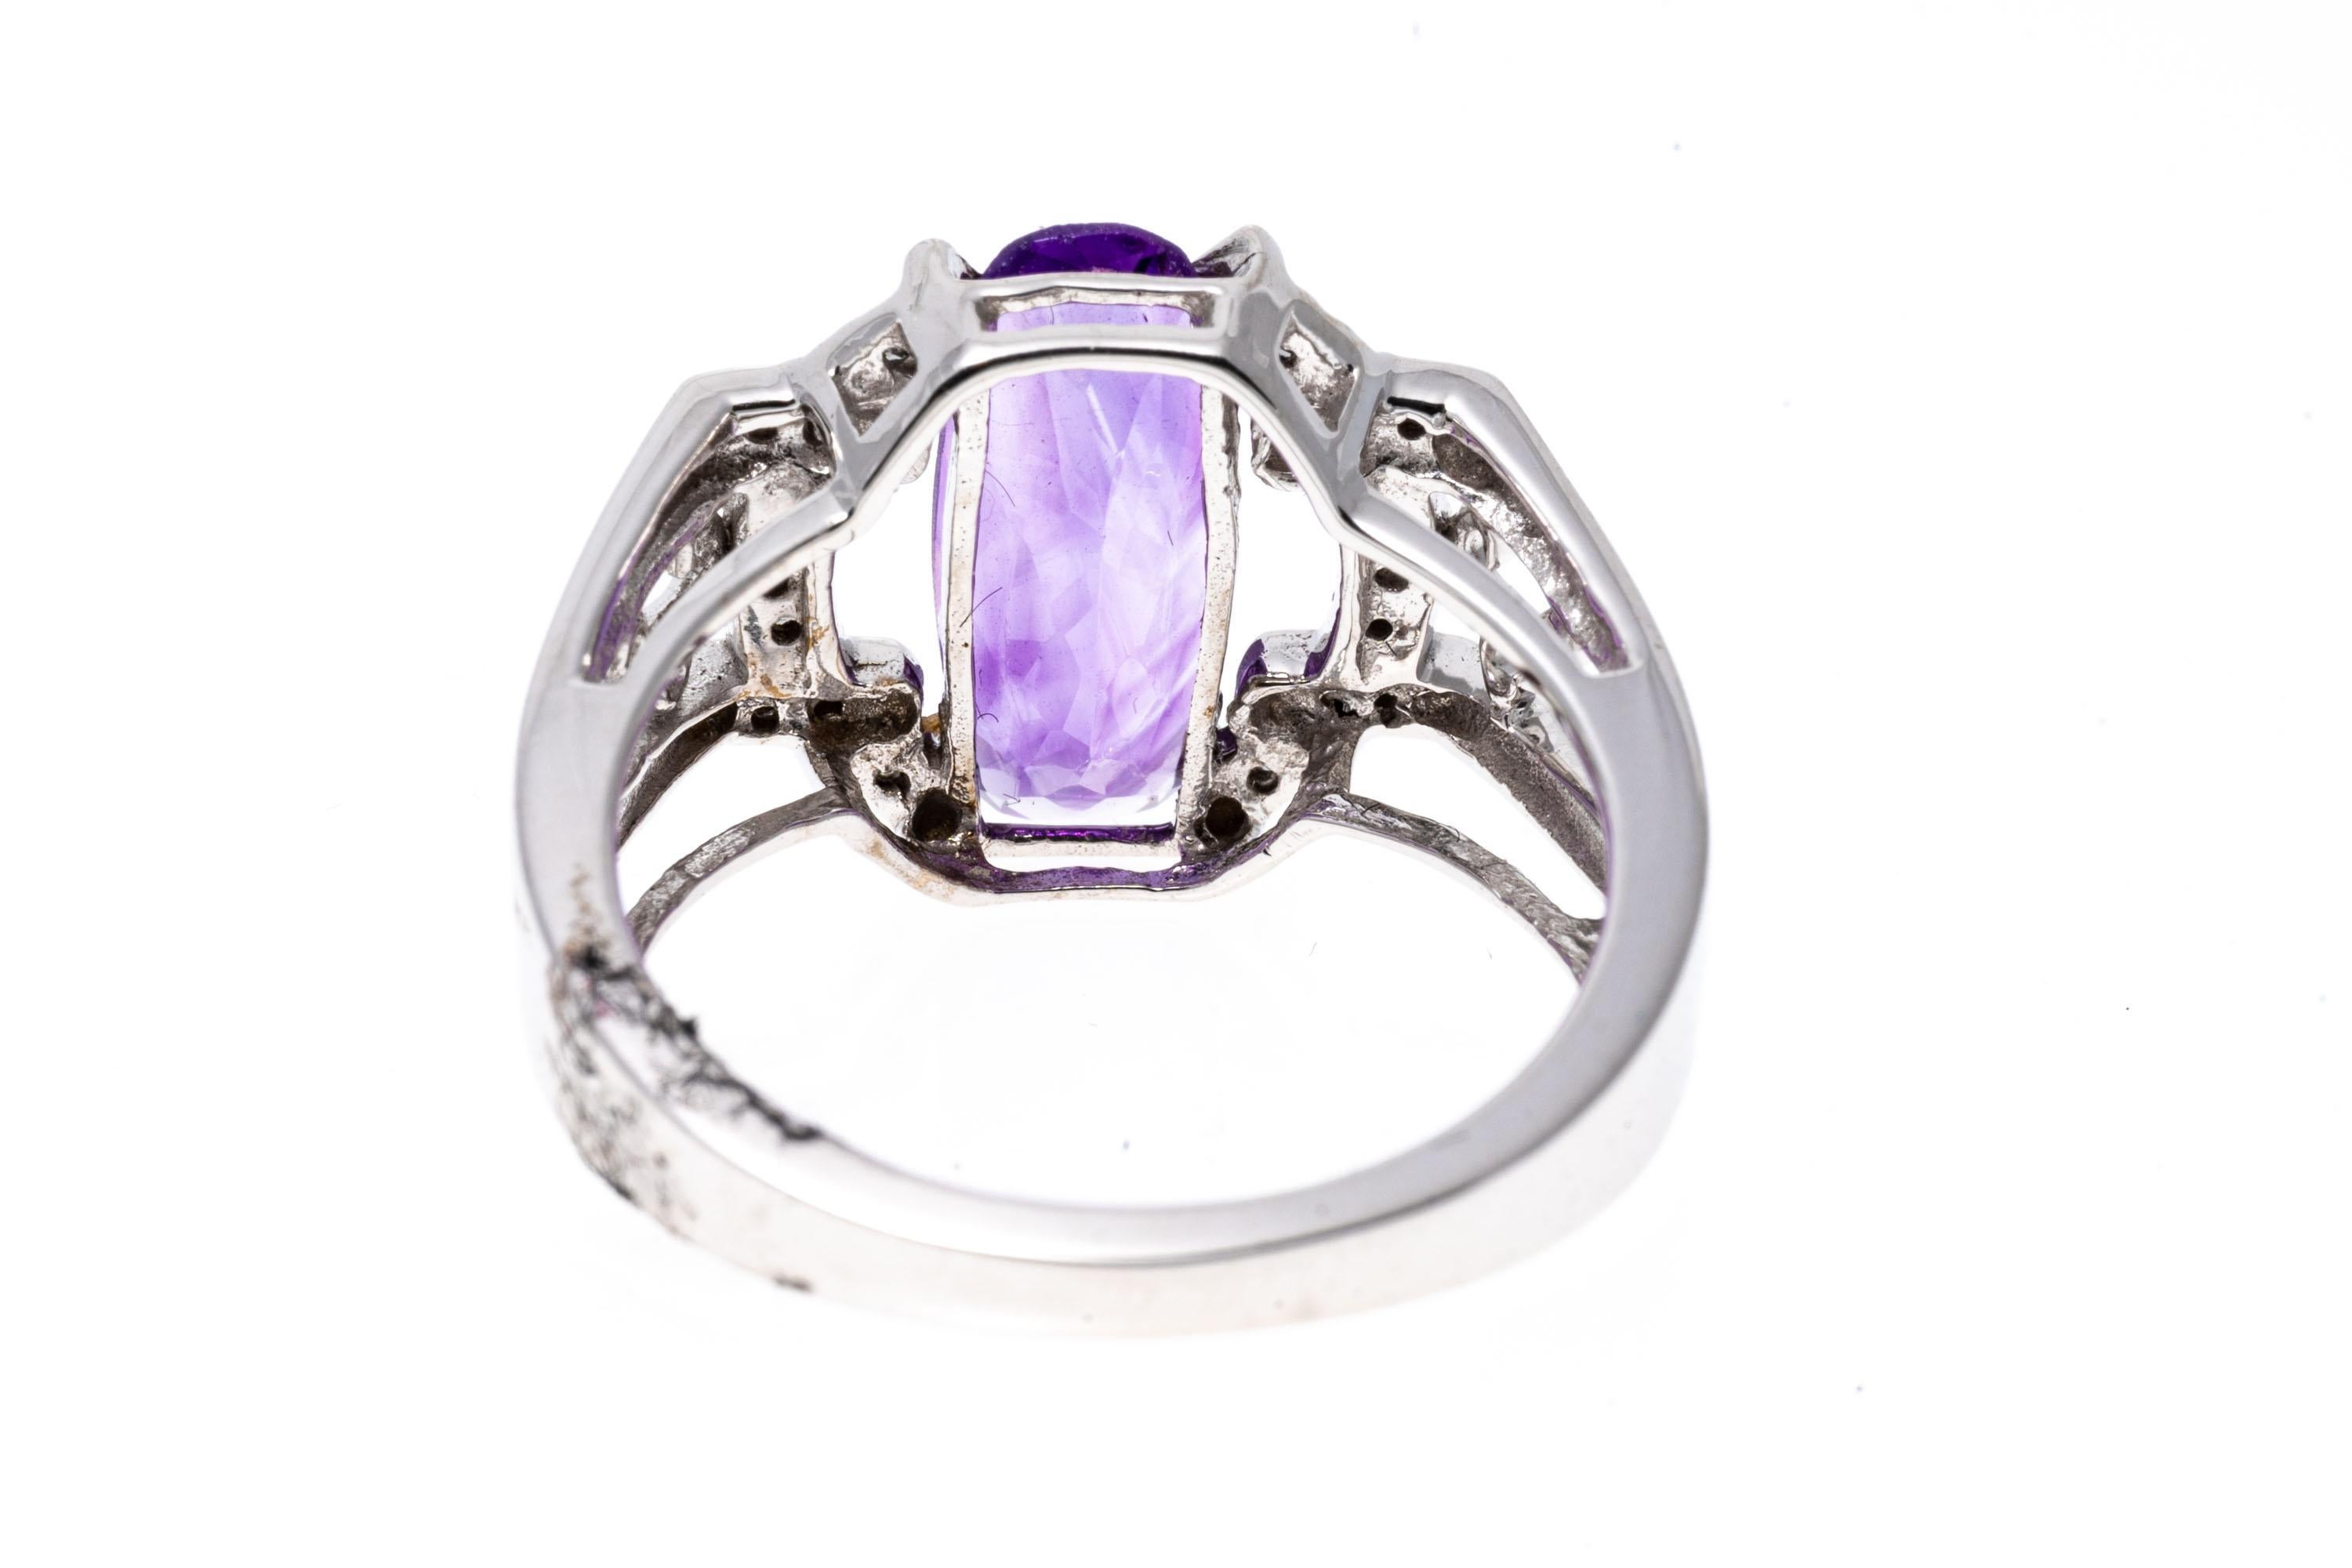 14k white gold ring. This pretty ring has an elongated, narrow oval faceted, light purple color amethyst, approximately 1.90 CTS, and prong set into an open architectural style frame, set with accent diamonds, approximately 0.04 TCW. The ring is